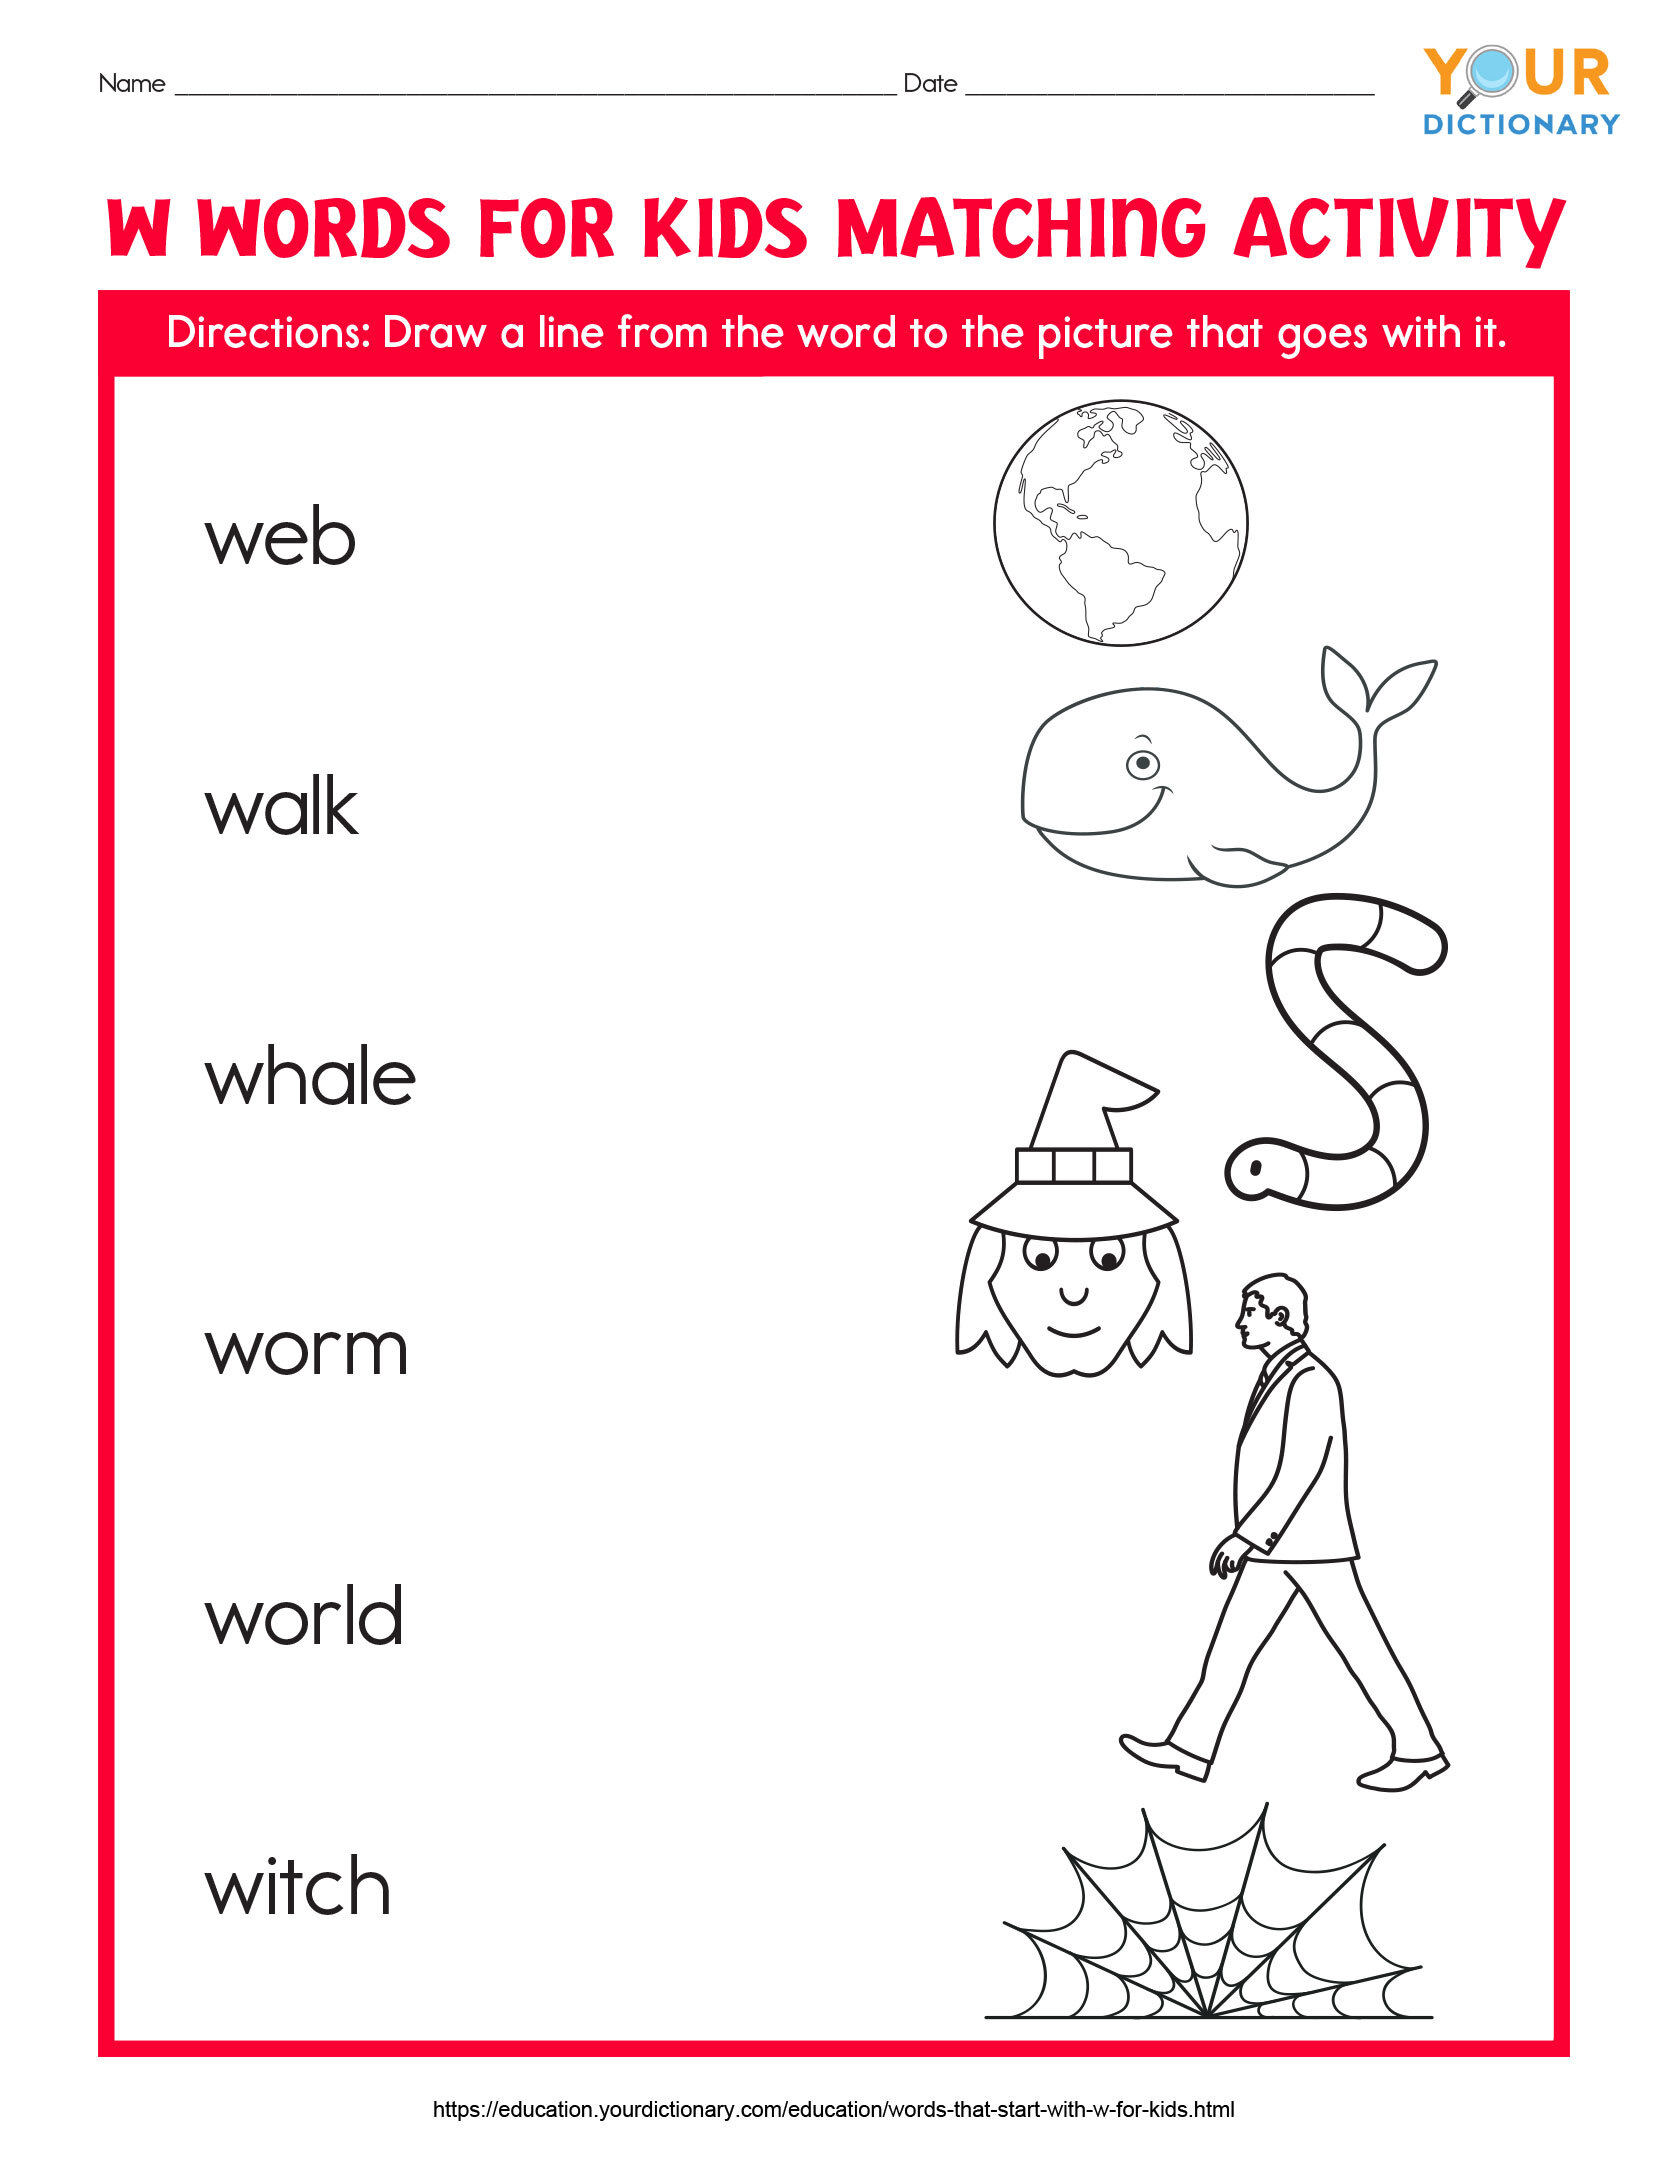 w words for kids matching activity